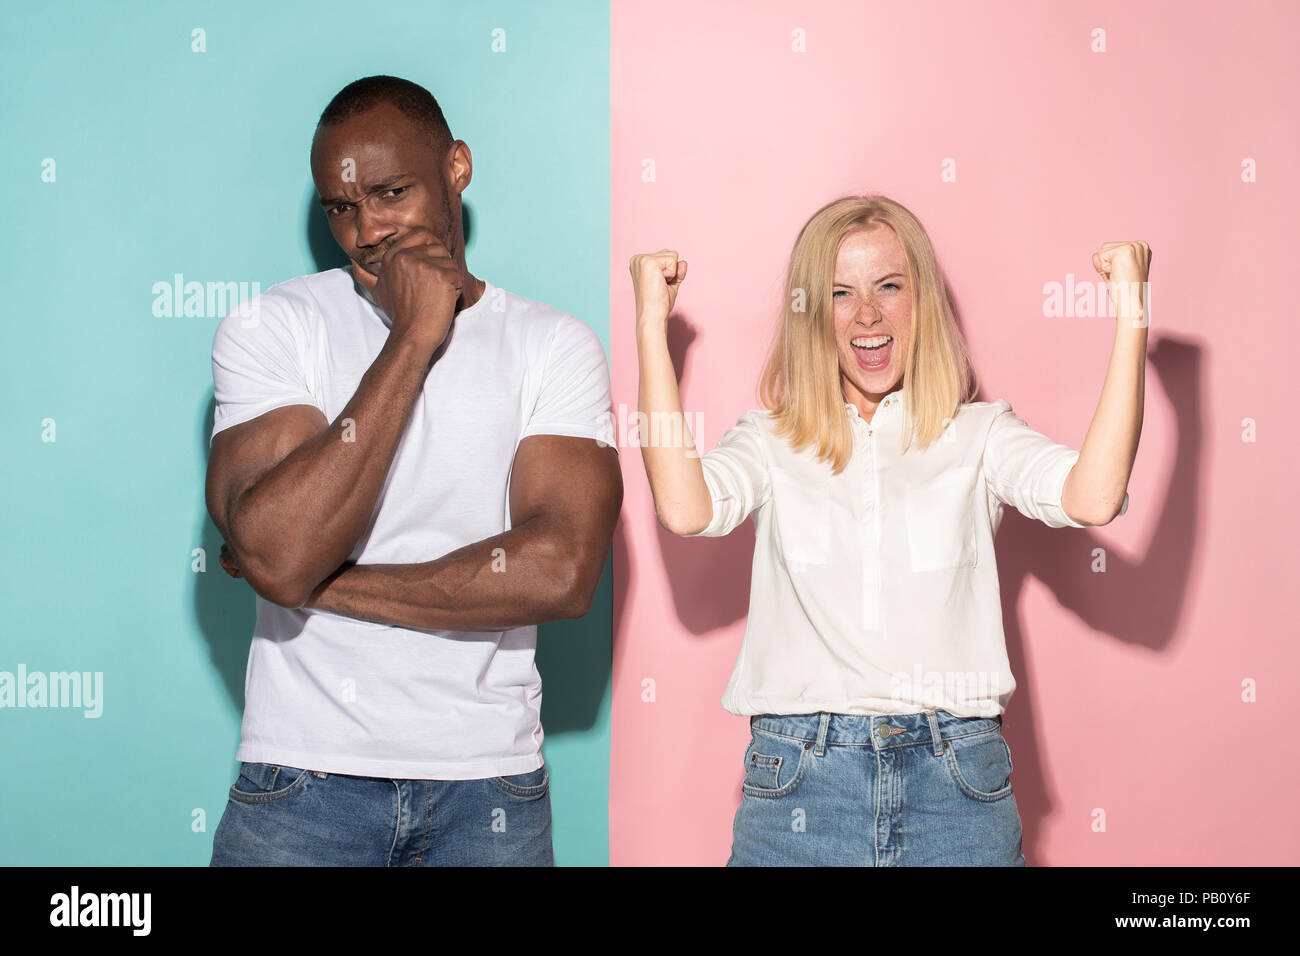 Closeup portrait of young couple, man, woman. One being excited happy smiling, other serious, concerned, unhappy on pink and blue background. Emotion contrasts Stock Photo